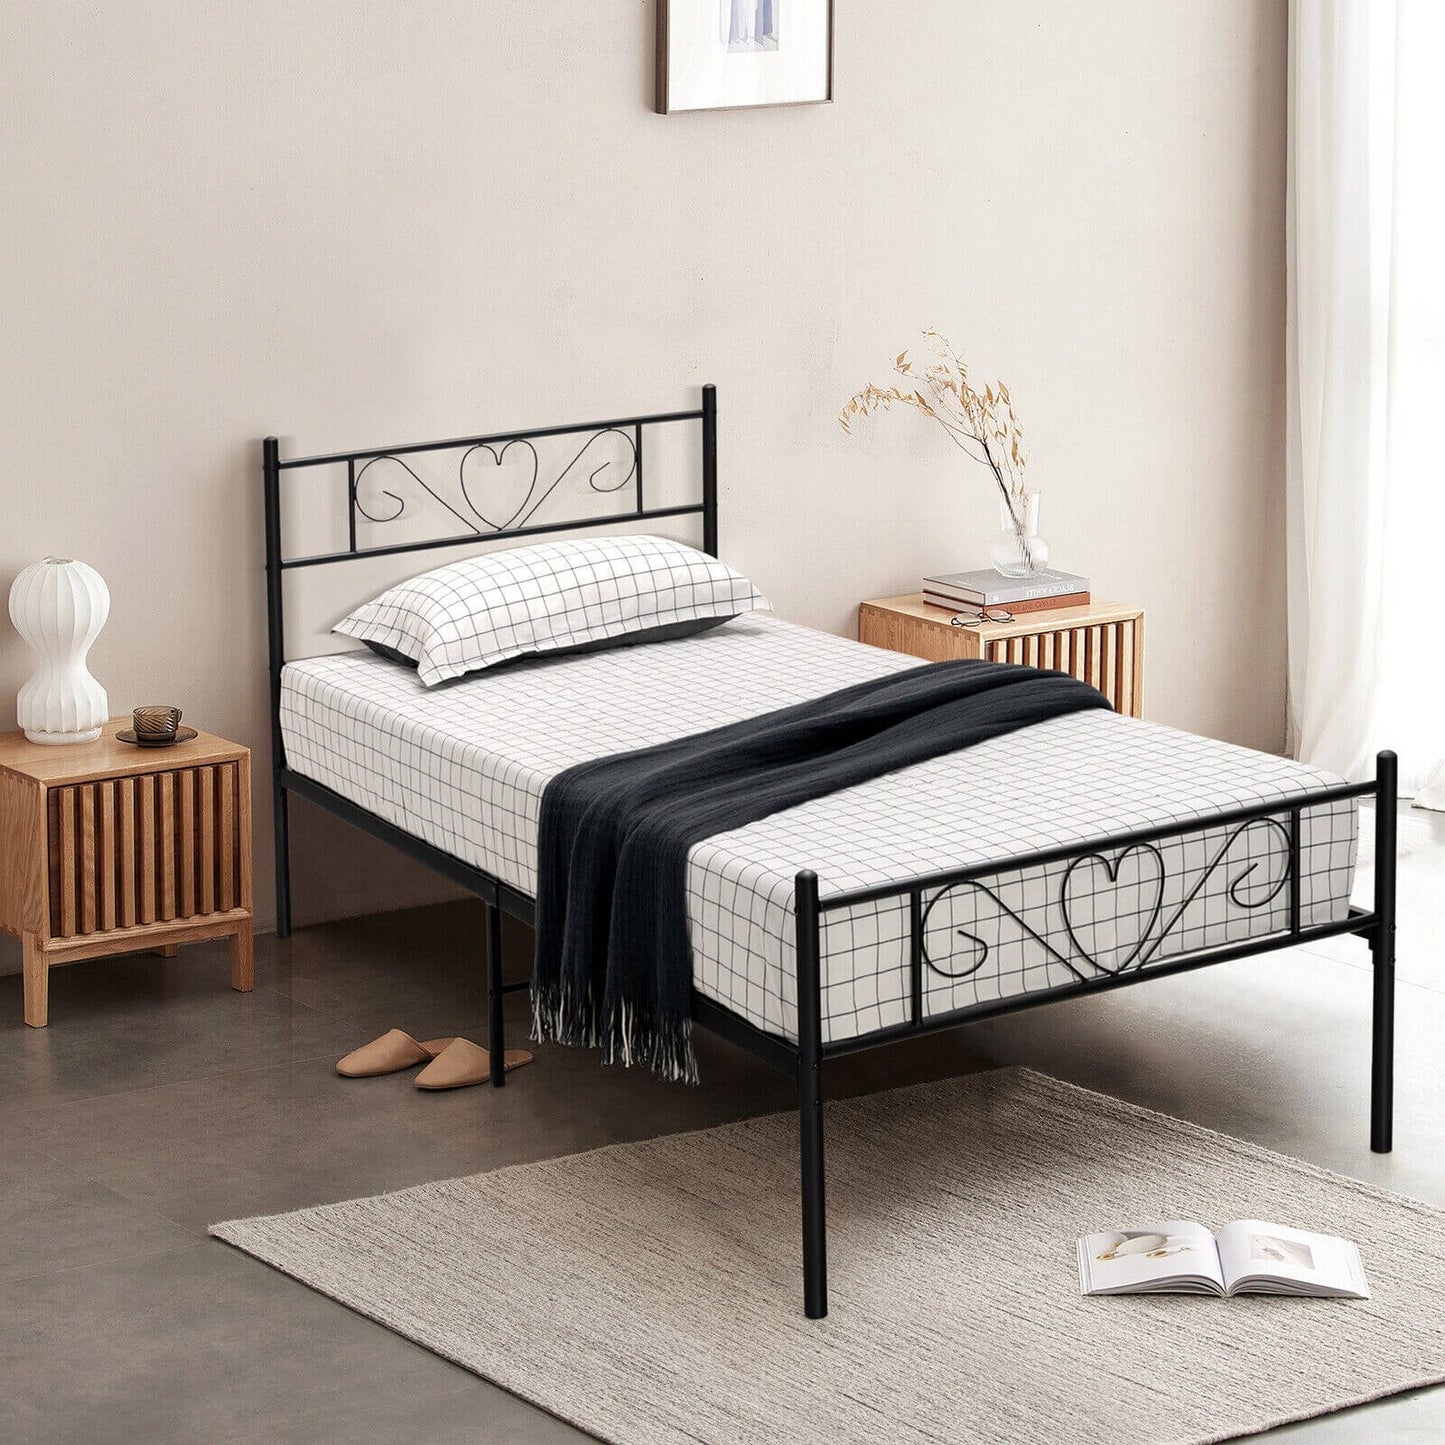 Twin XL Metal Bed Frame with Heart-shaped Headboard, Black